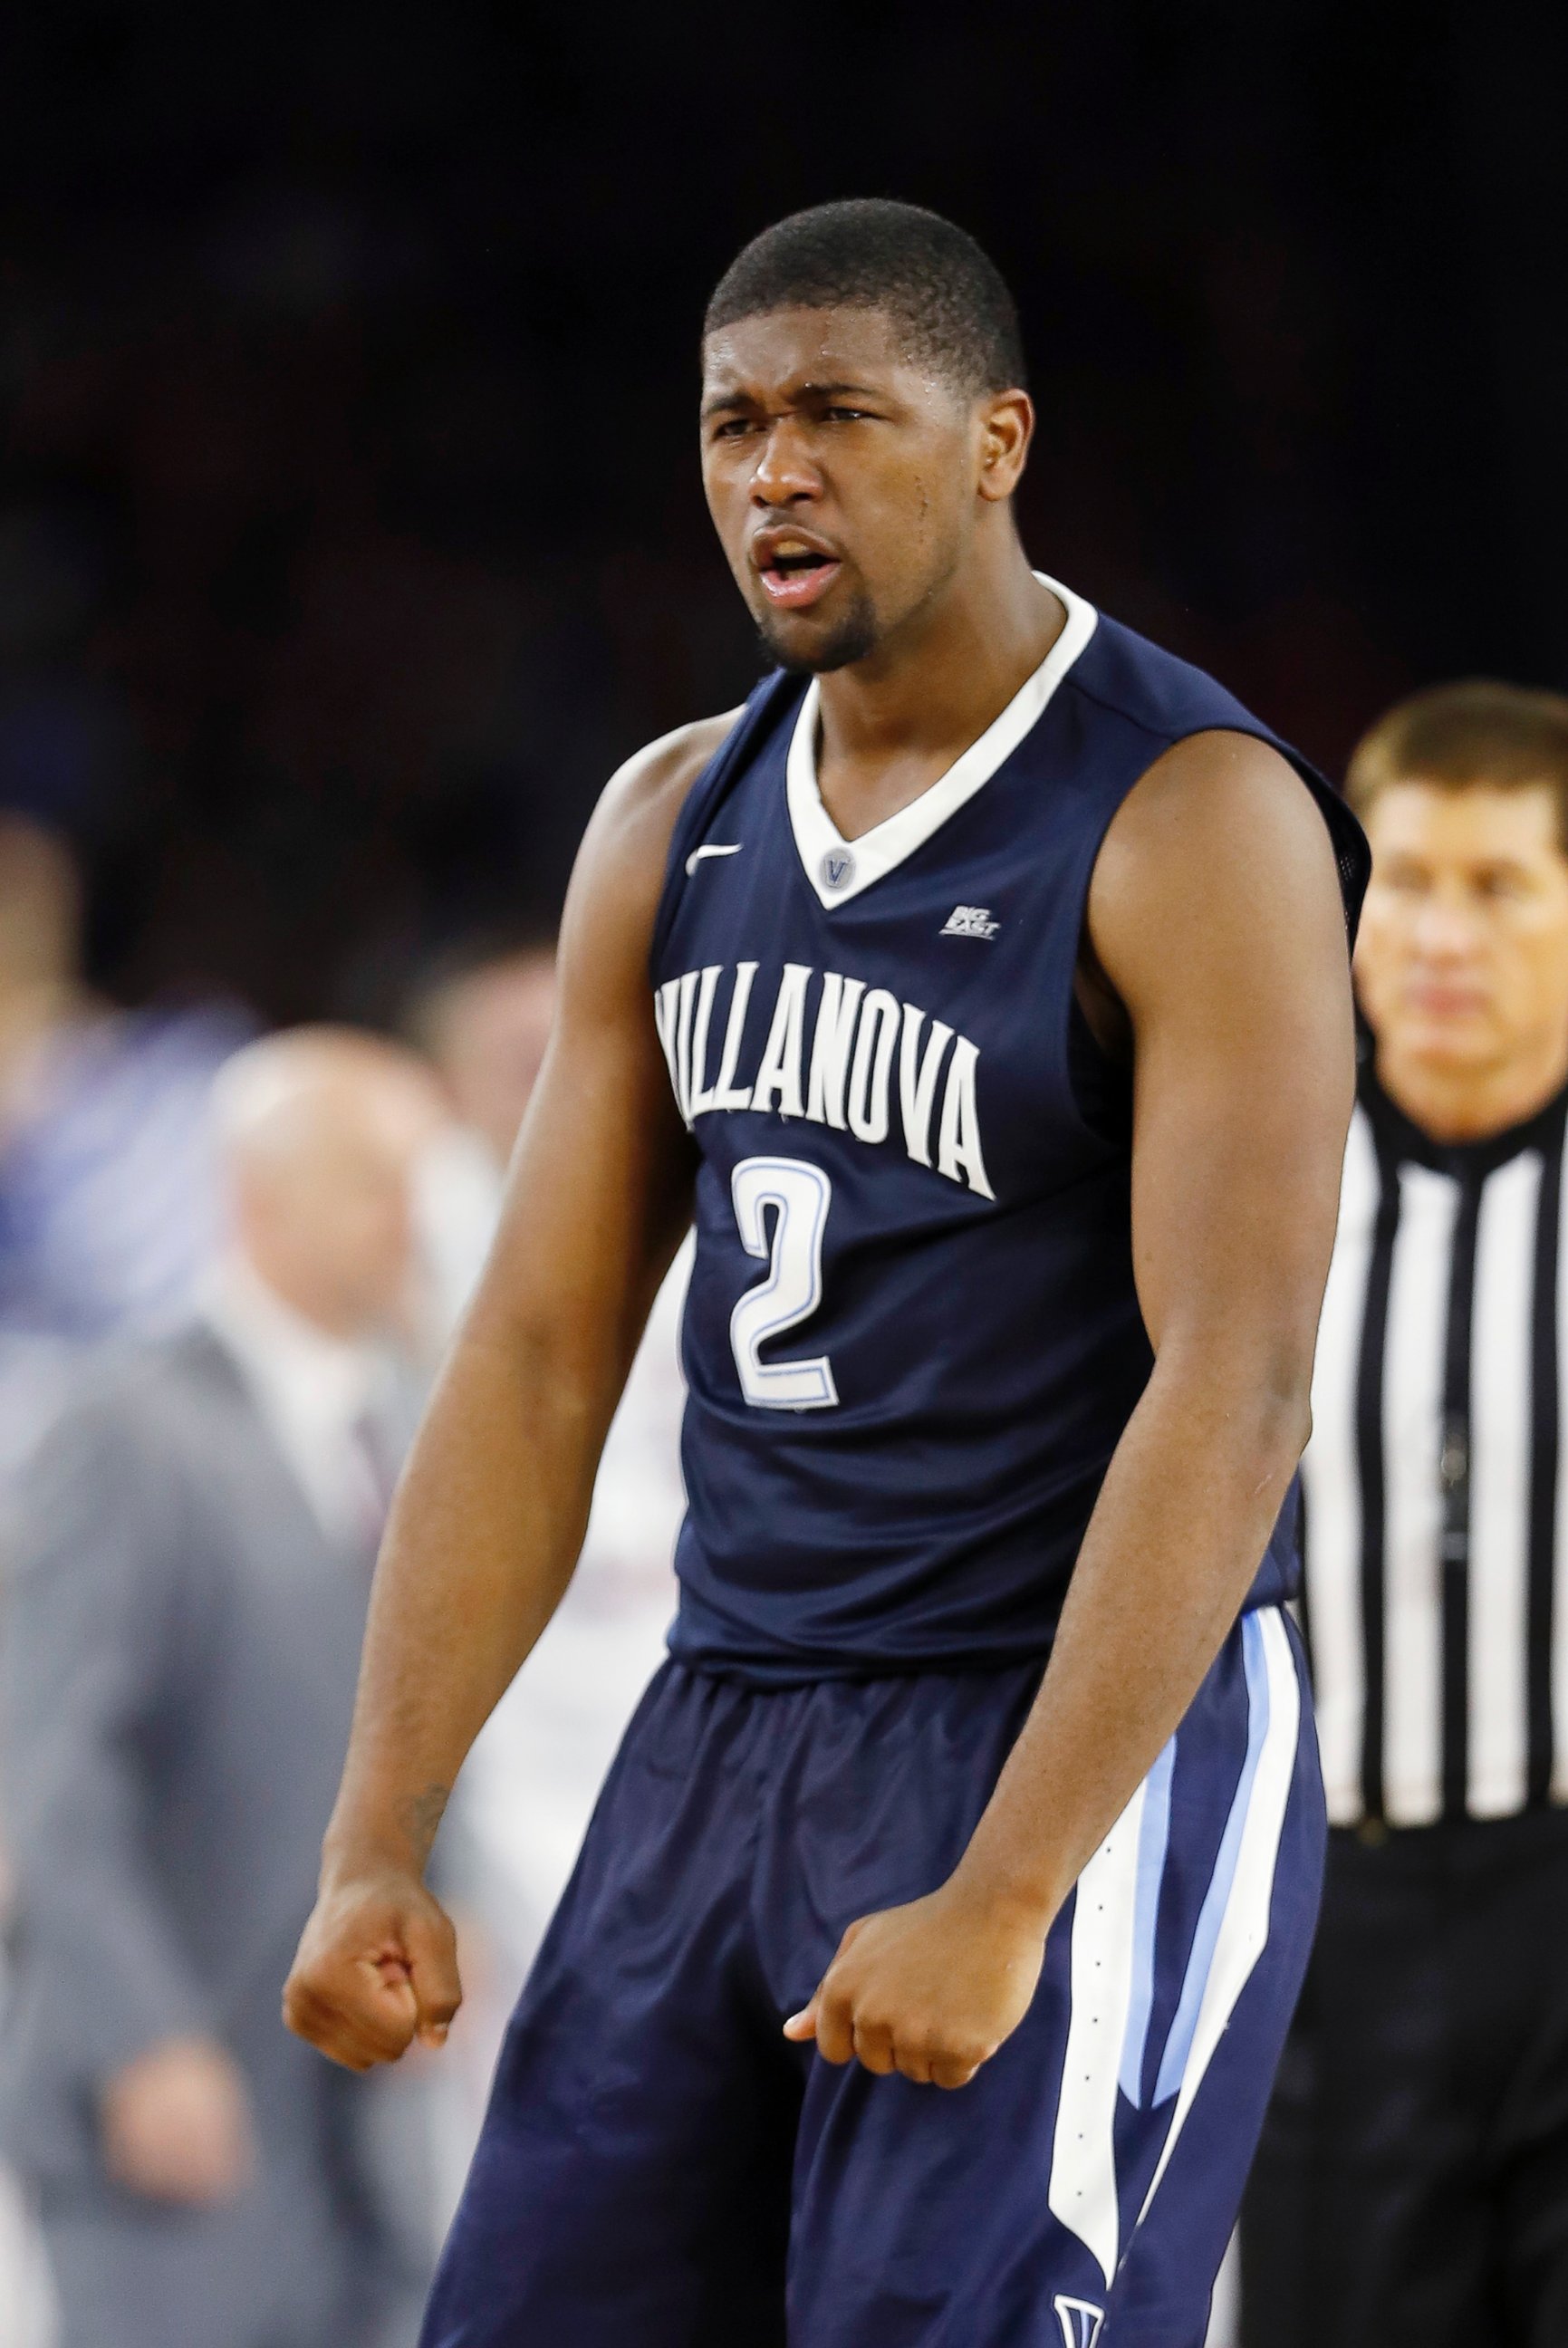 PHOTO: Villanova forward Kris Jenkins reacts to play against Oklahoma during the second half of the NCAA Final Four tournament college basketball semifinal game, April 2, 2016, in Houston